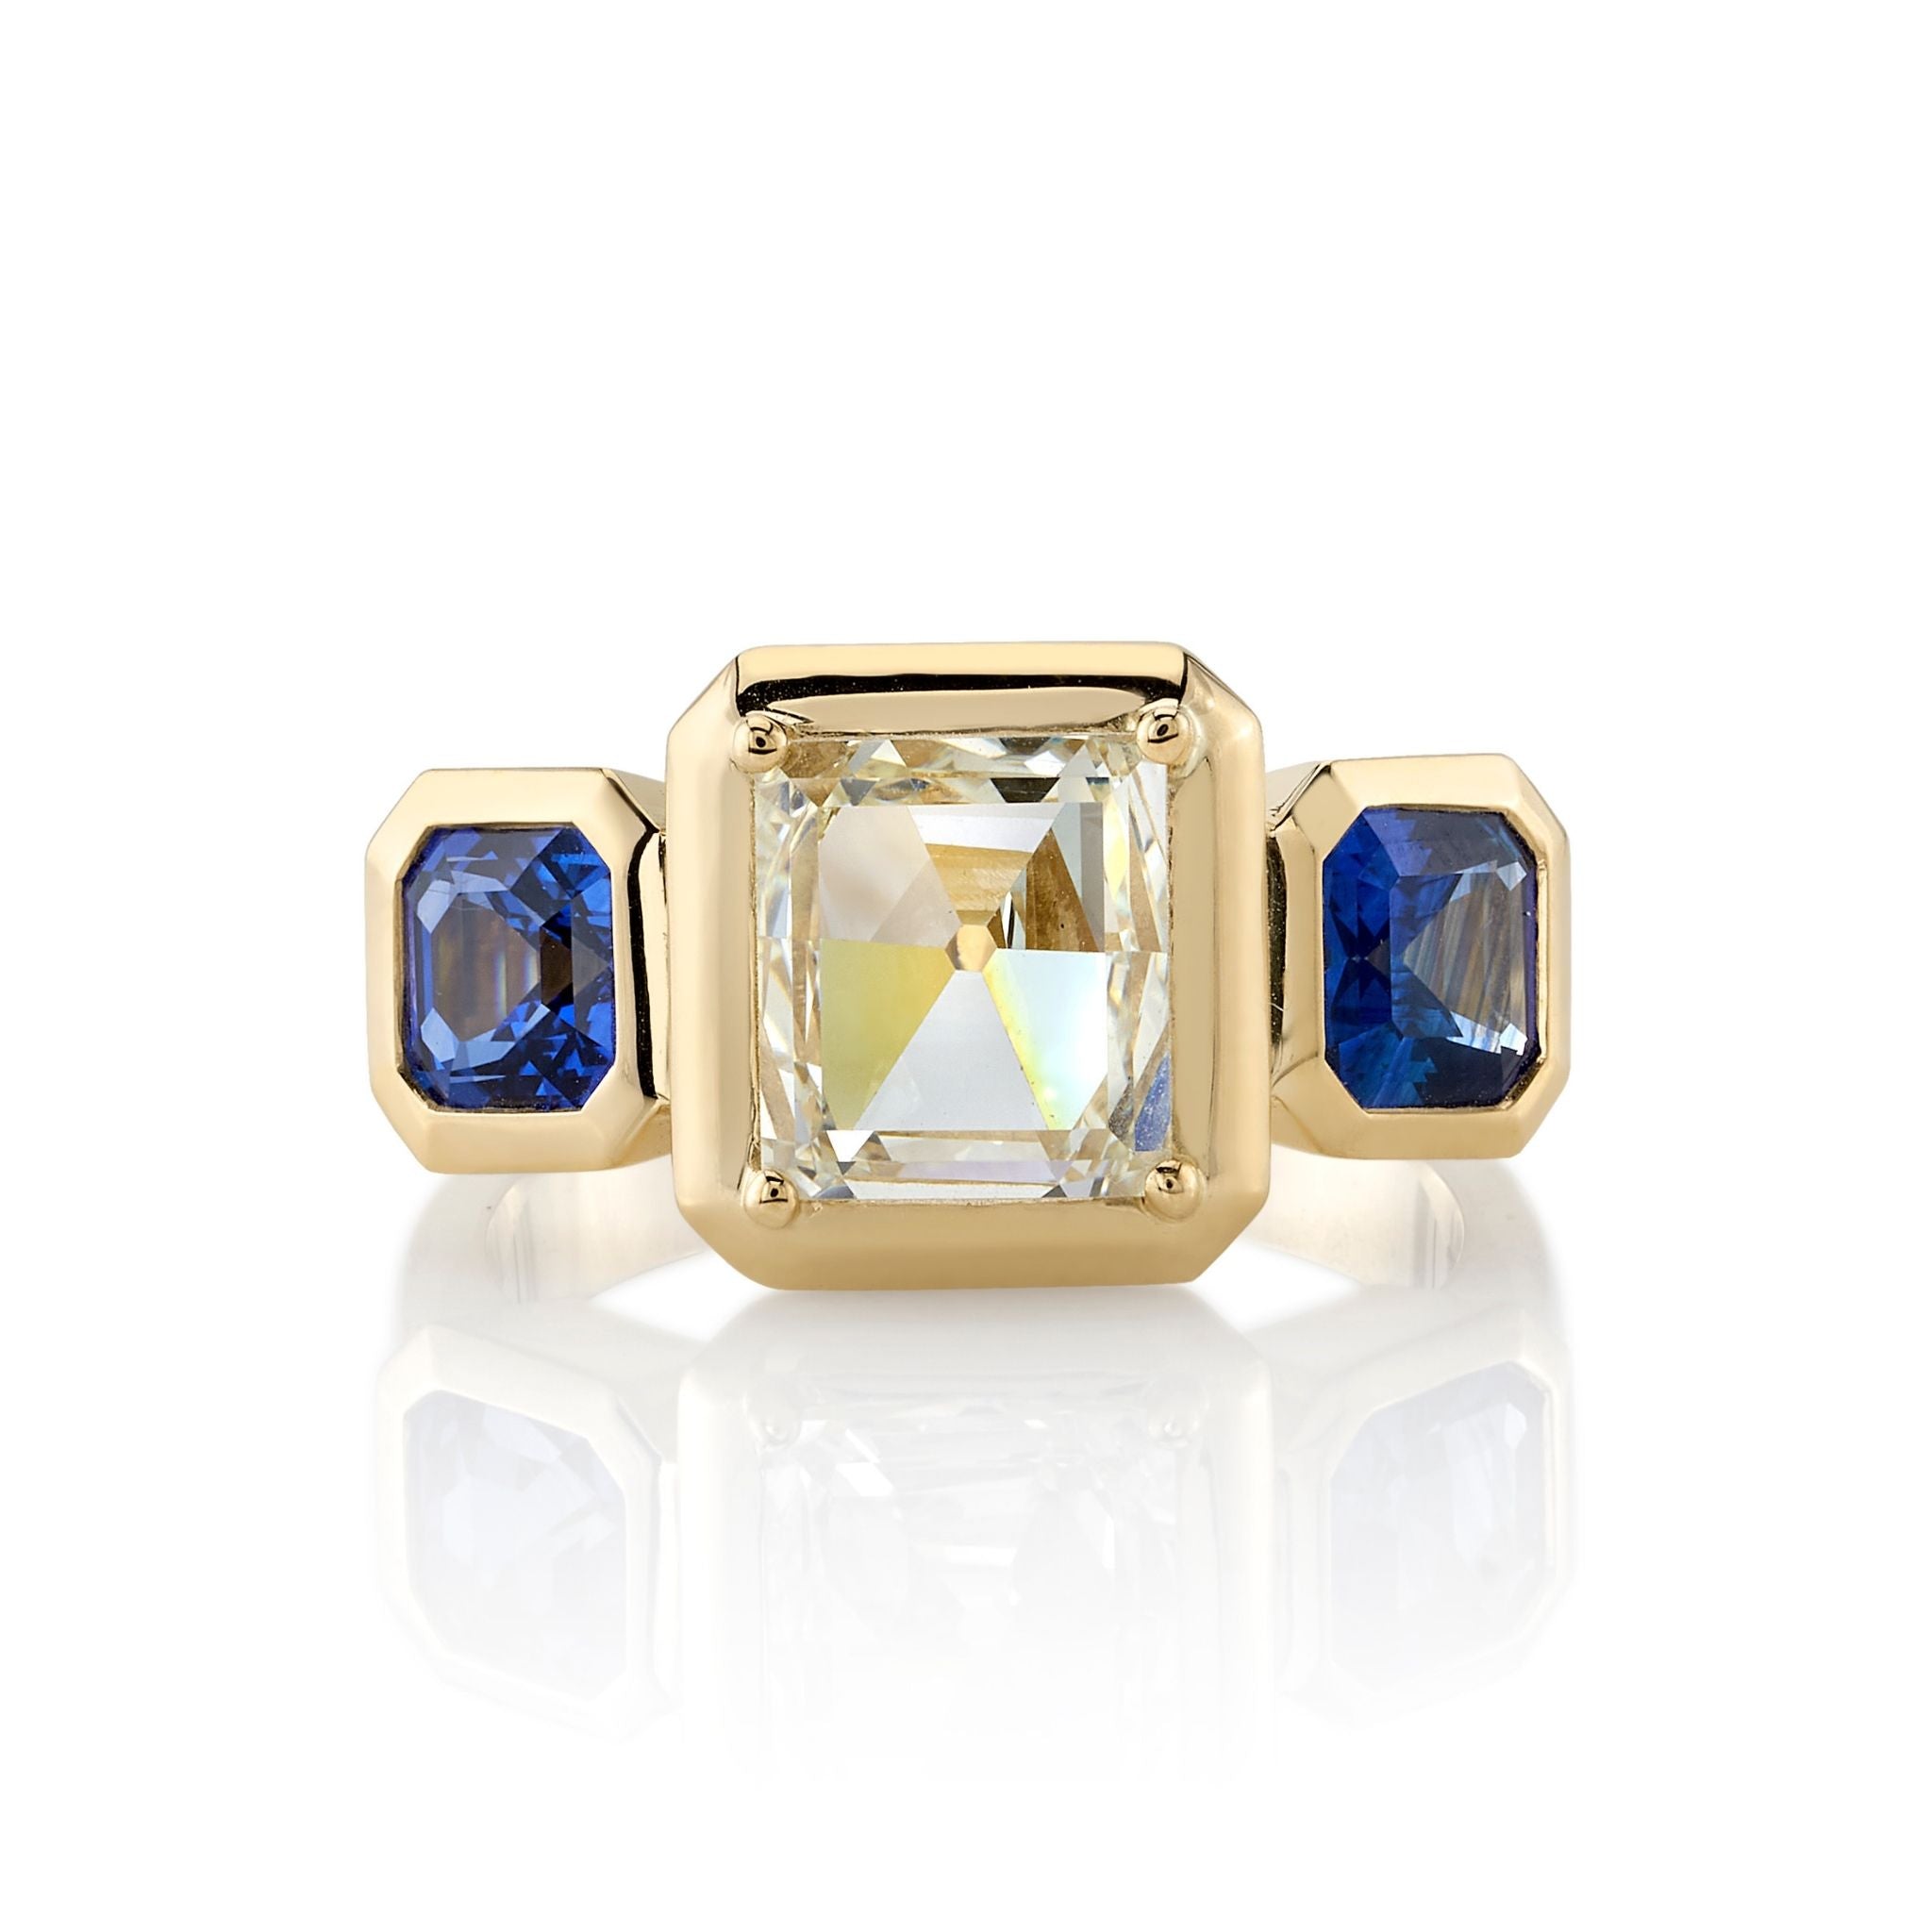 SINGLE STONE GLORIA RING featuring 1.77ct K/VS1 GIA certified rectangular mixed cut diamond with 1.65ctw blue sapphire accent stones set in a handcrafted 18K yellow gold mounting.